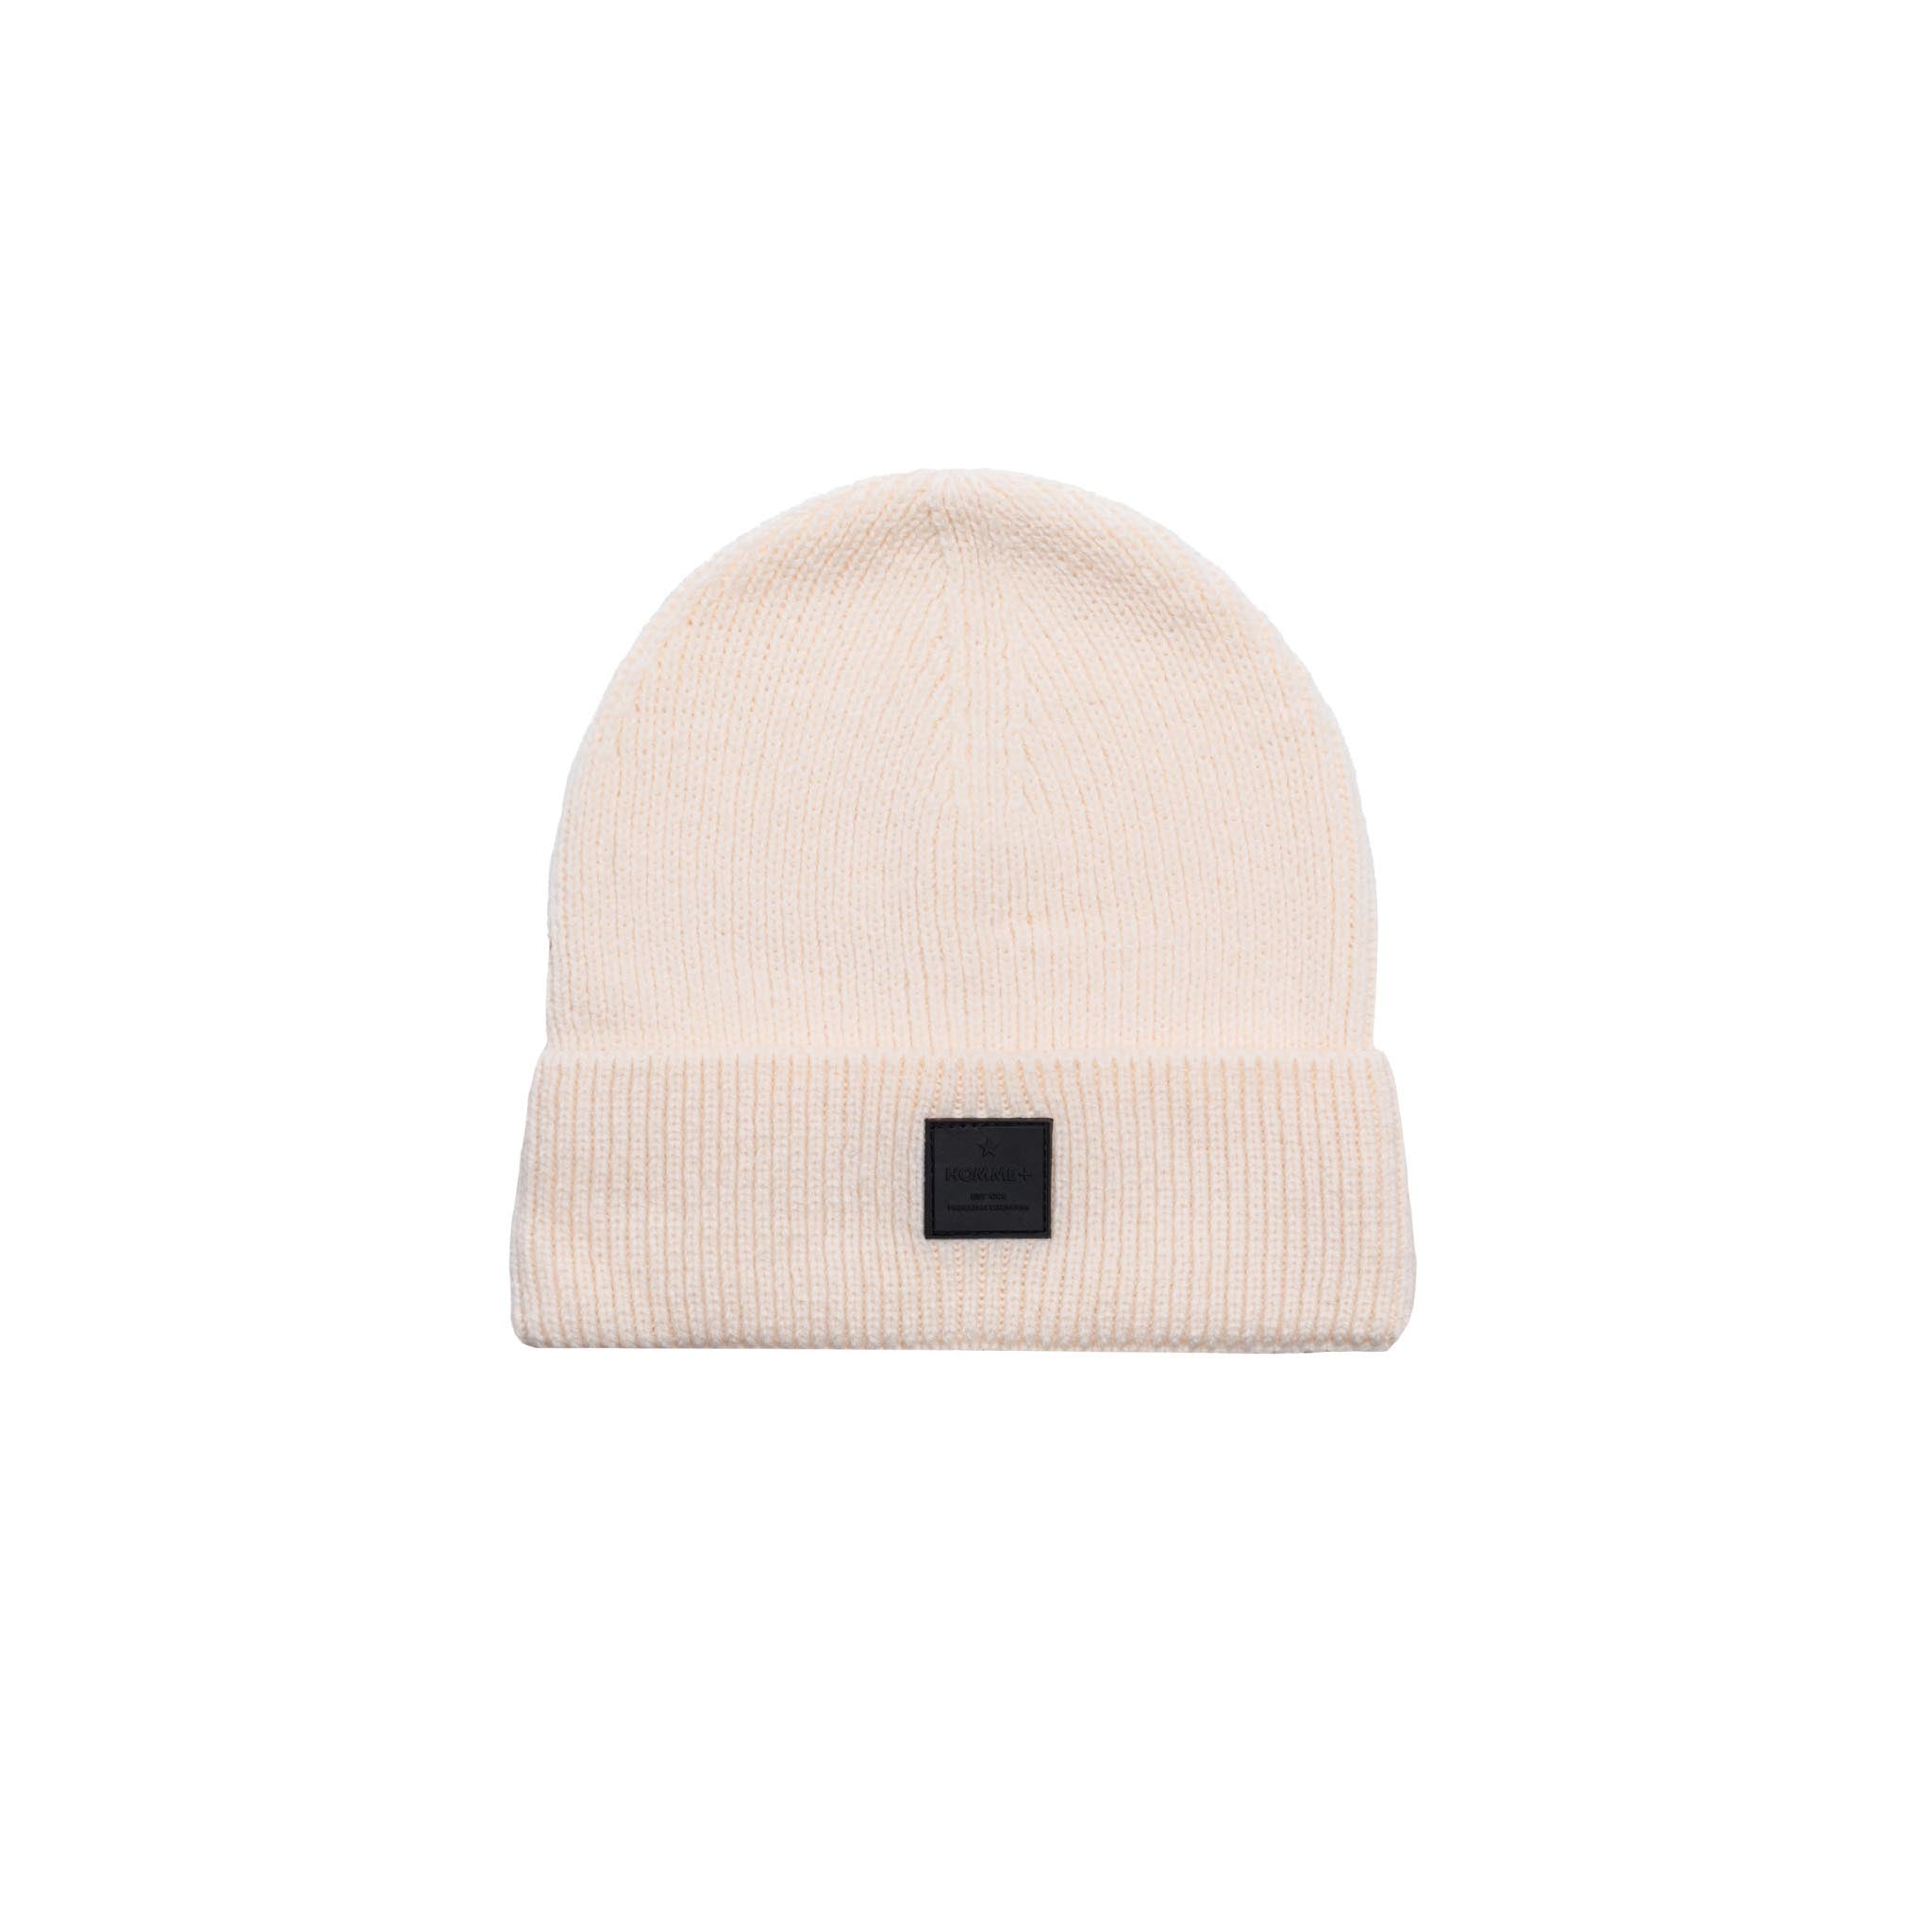 HOMME+ Rubber Patch Beanie Cream